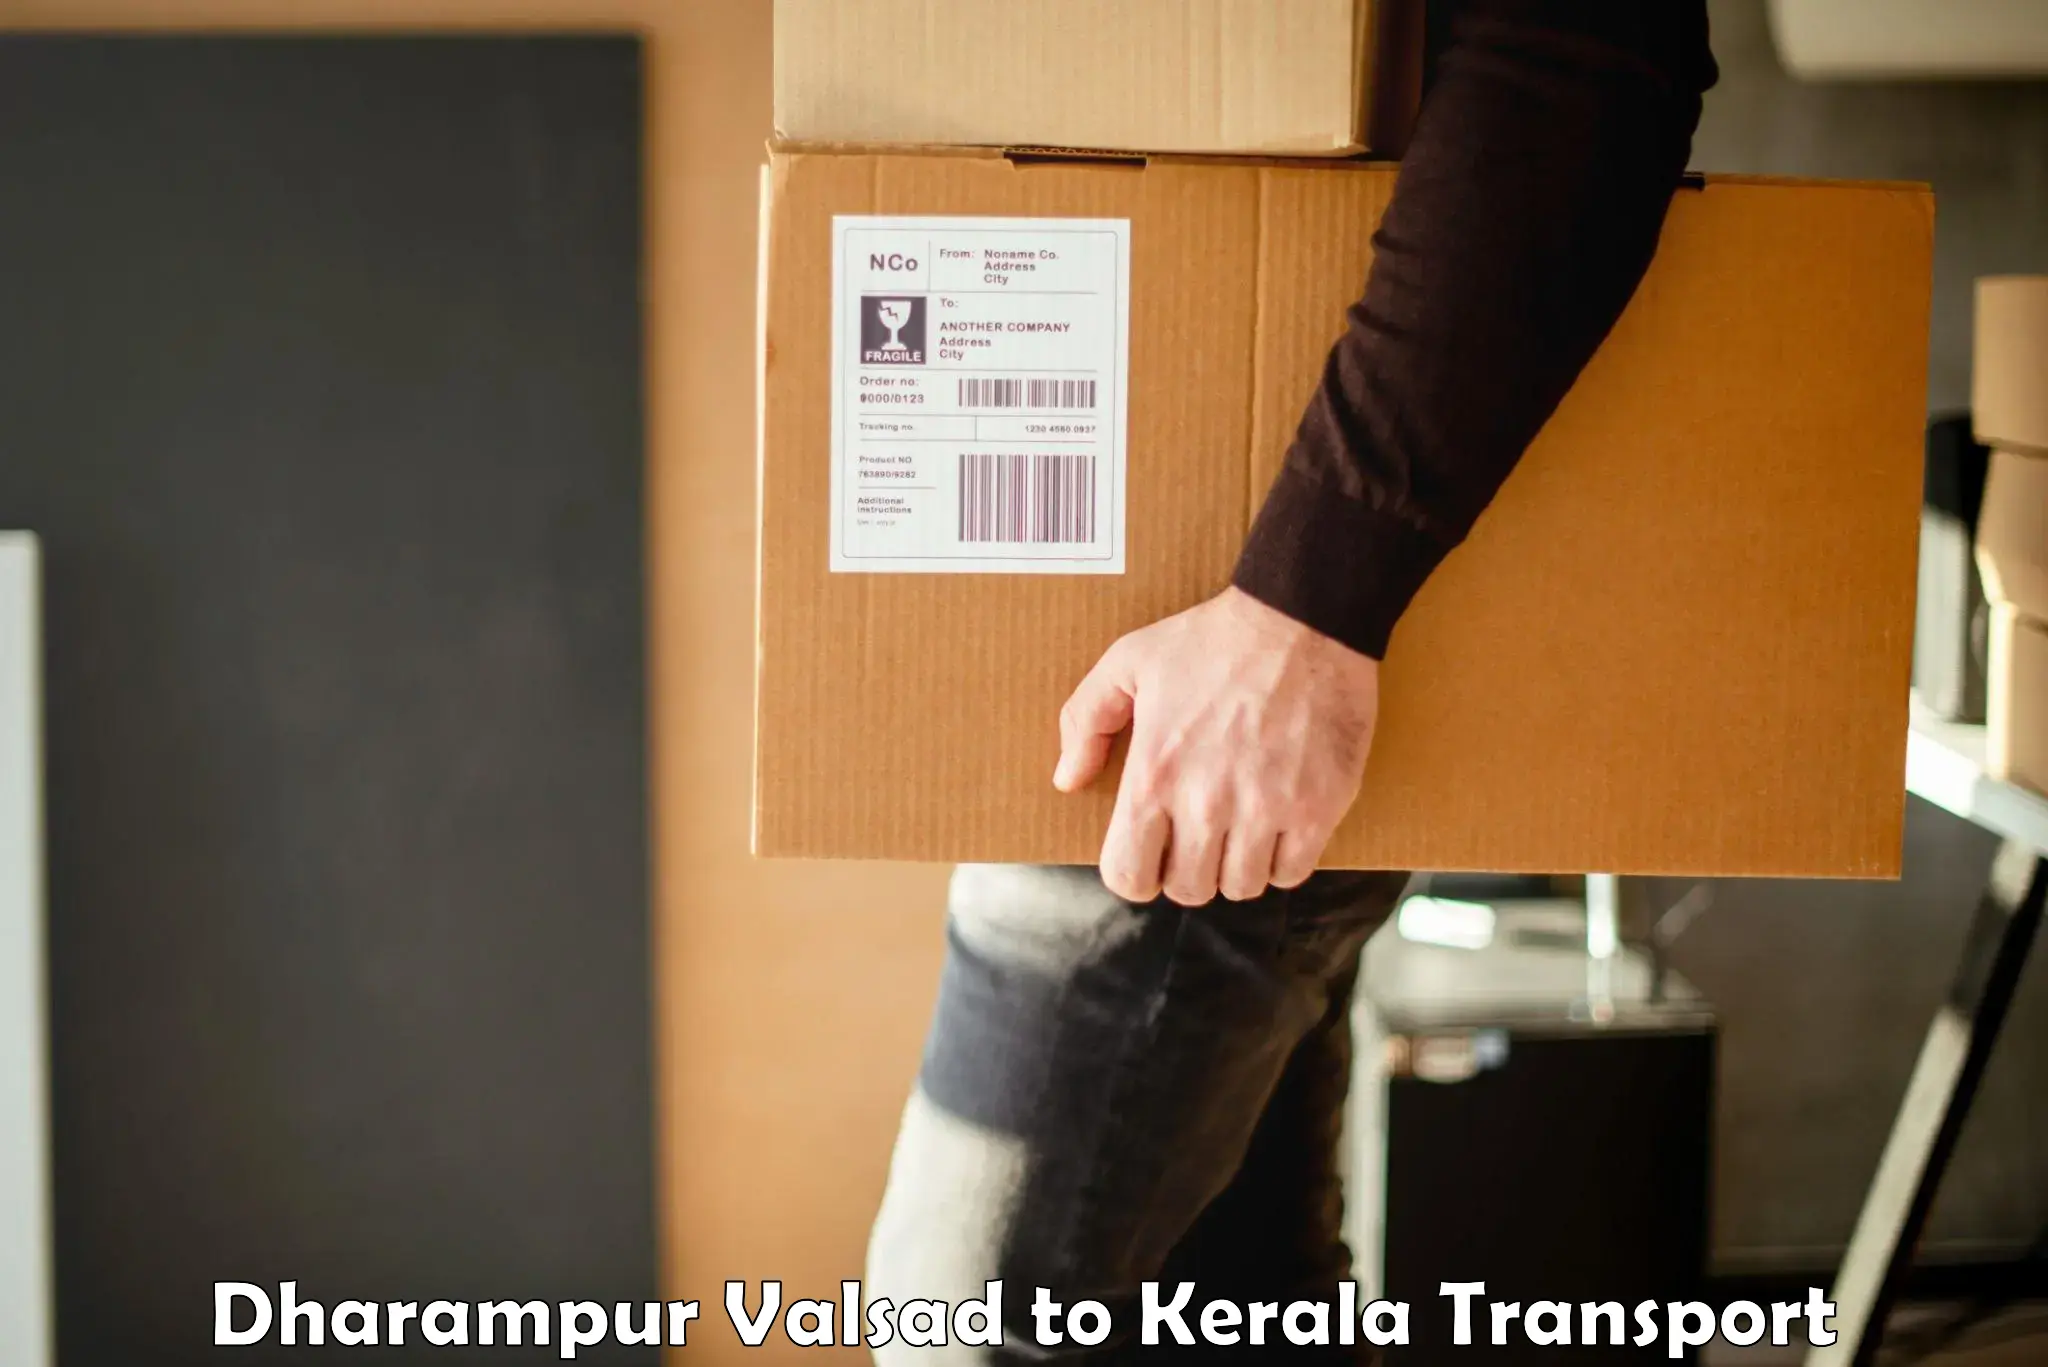 Delivery service Dharampur Valsad to Kerala